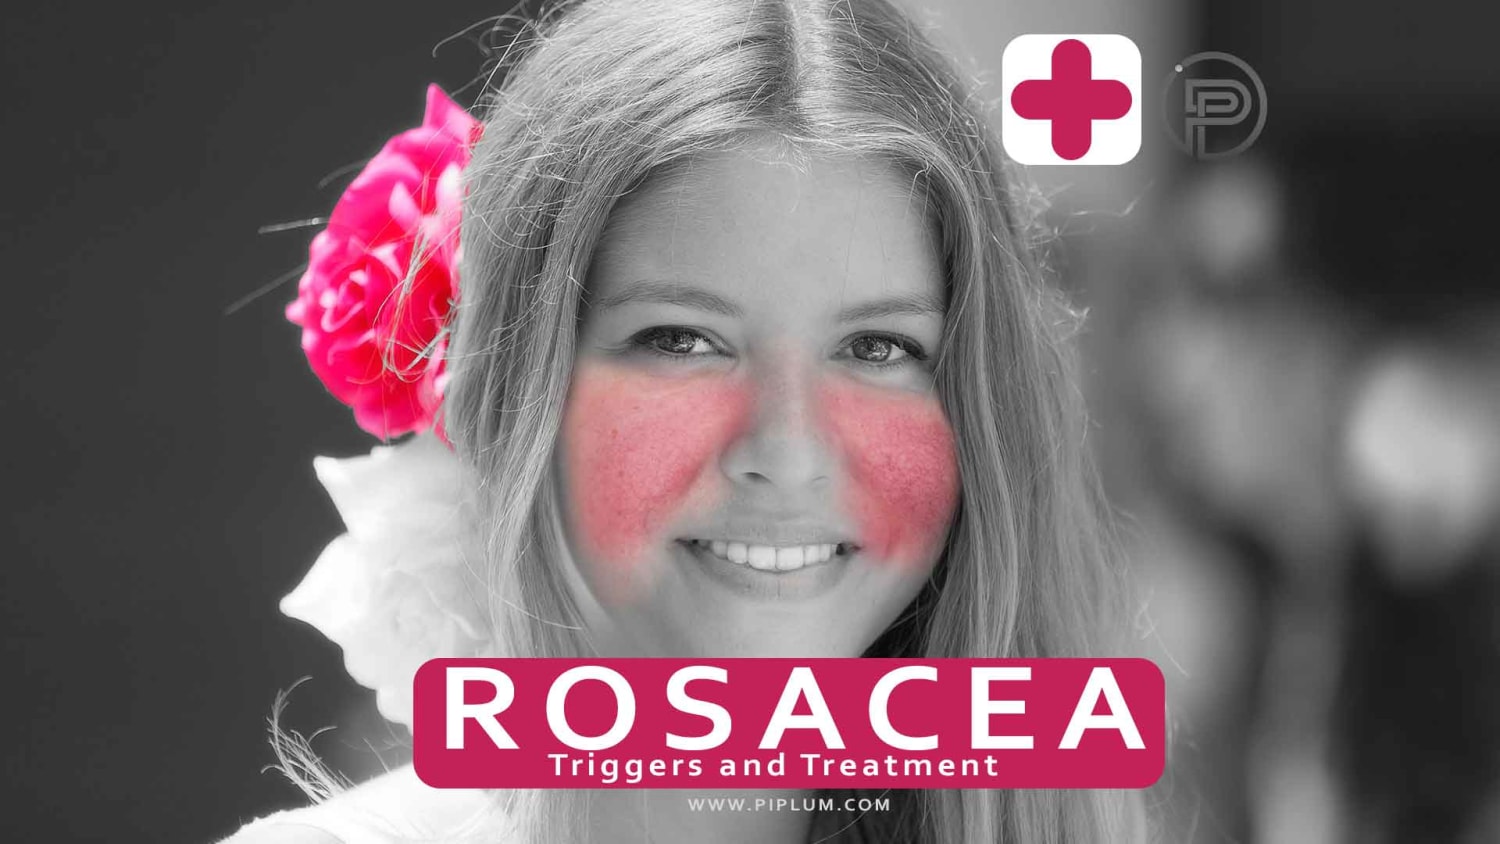 What Are The Symptoms Of Rosacea? What Are The Triggers And Risk Factors.